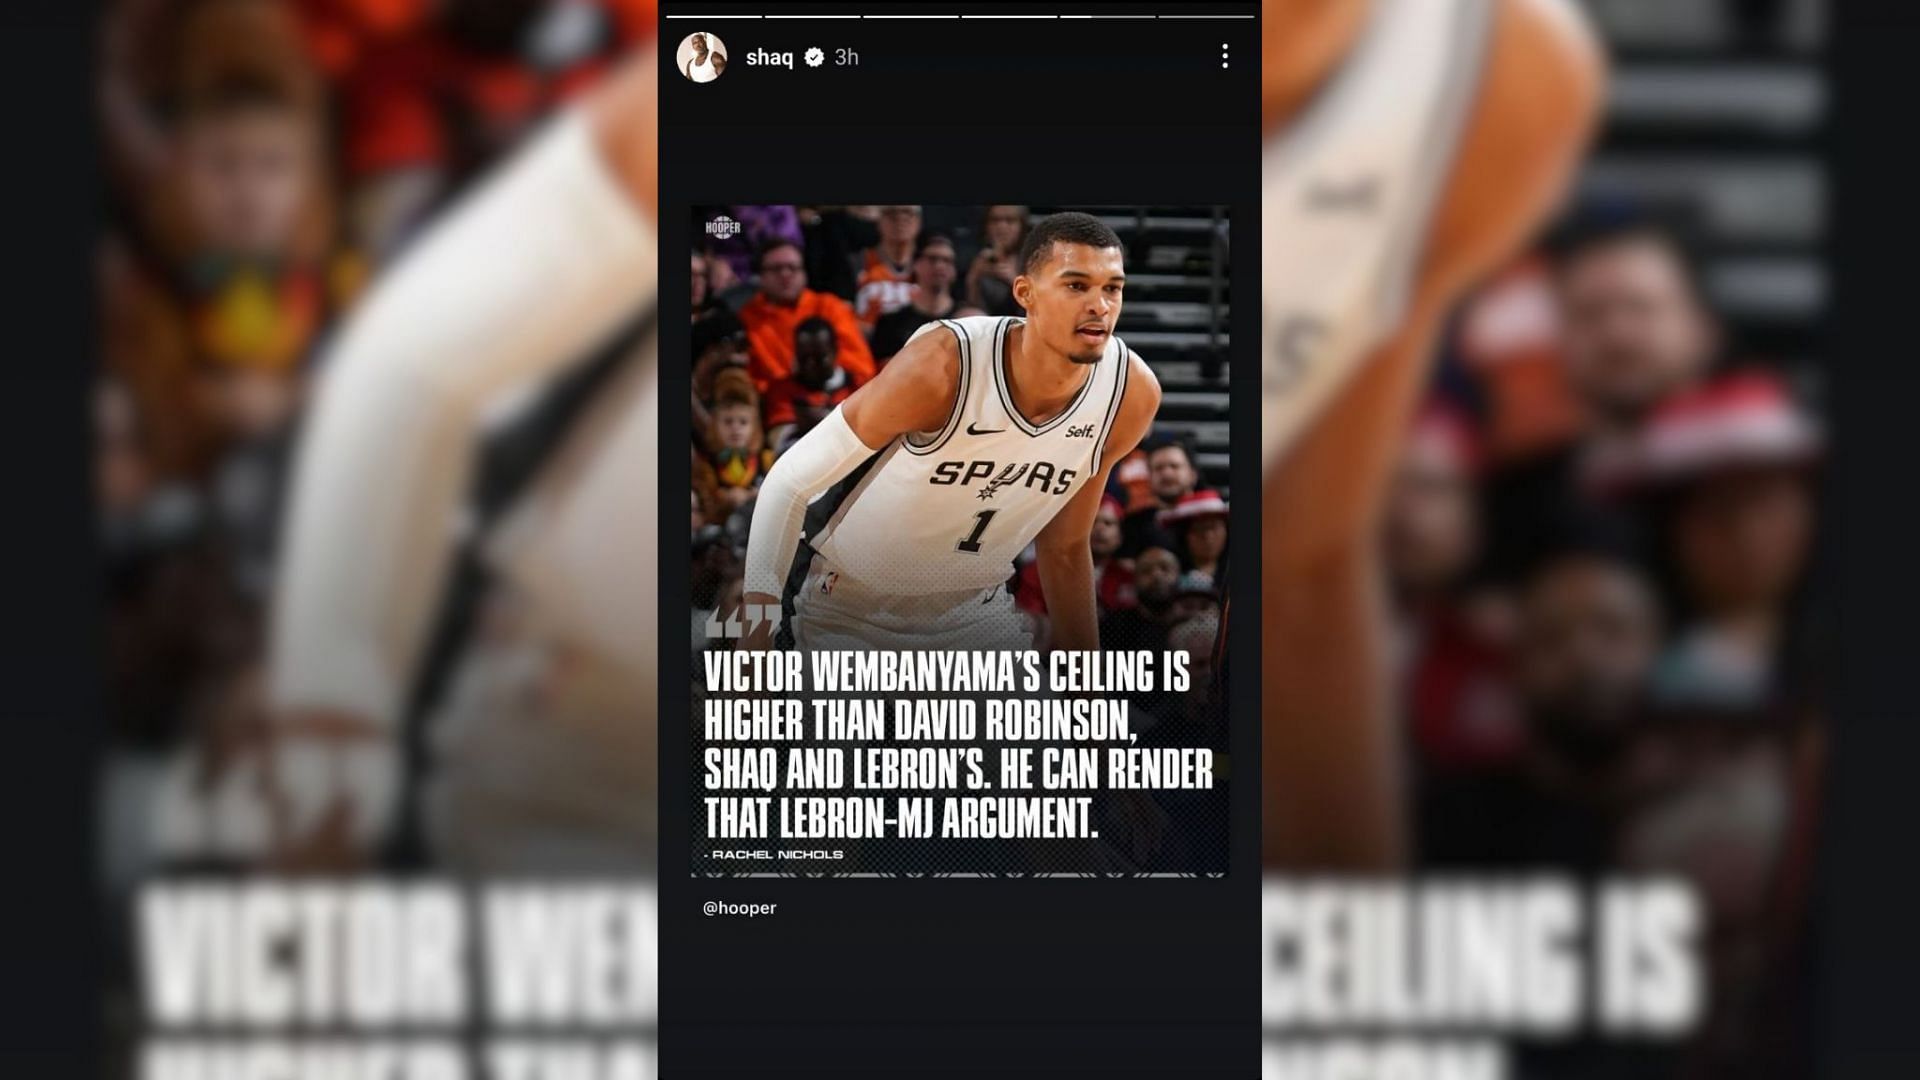 Shaquille O&rsquo;Neal shares a Rachel Nichols quote about Victor Wembanyama&rsquo;s ceiling